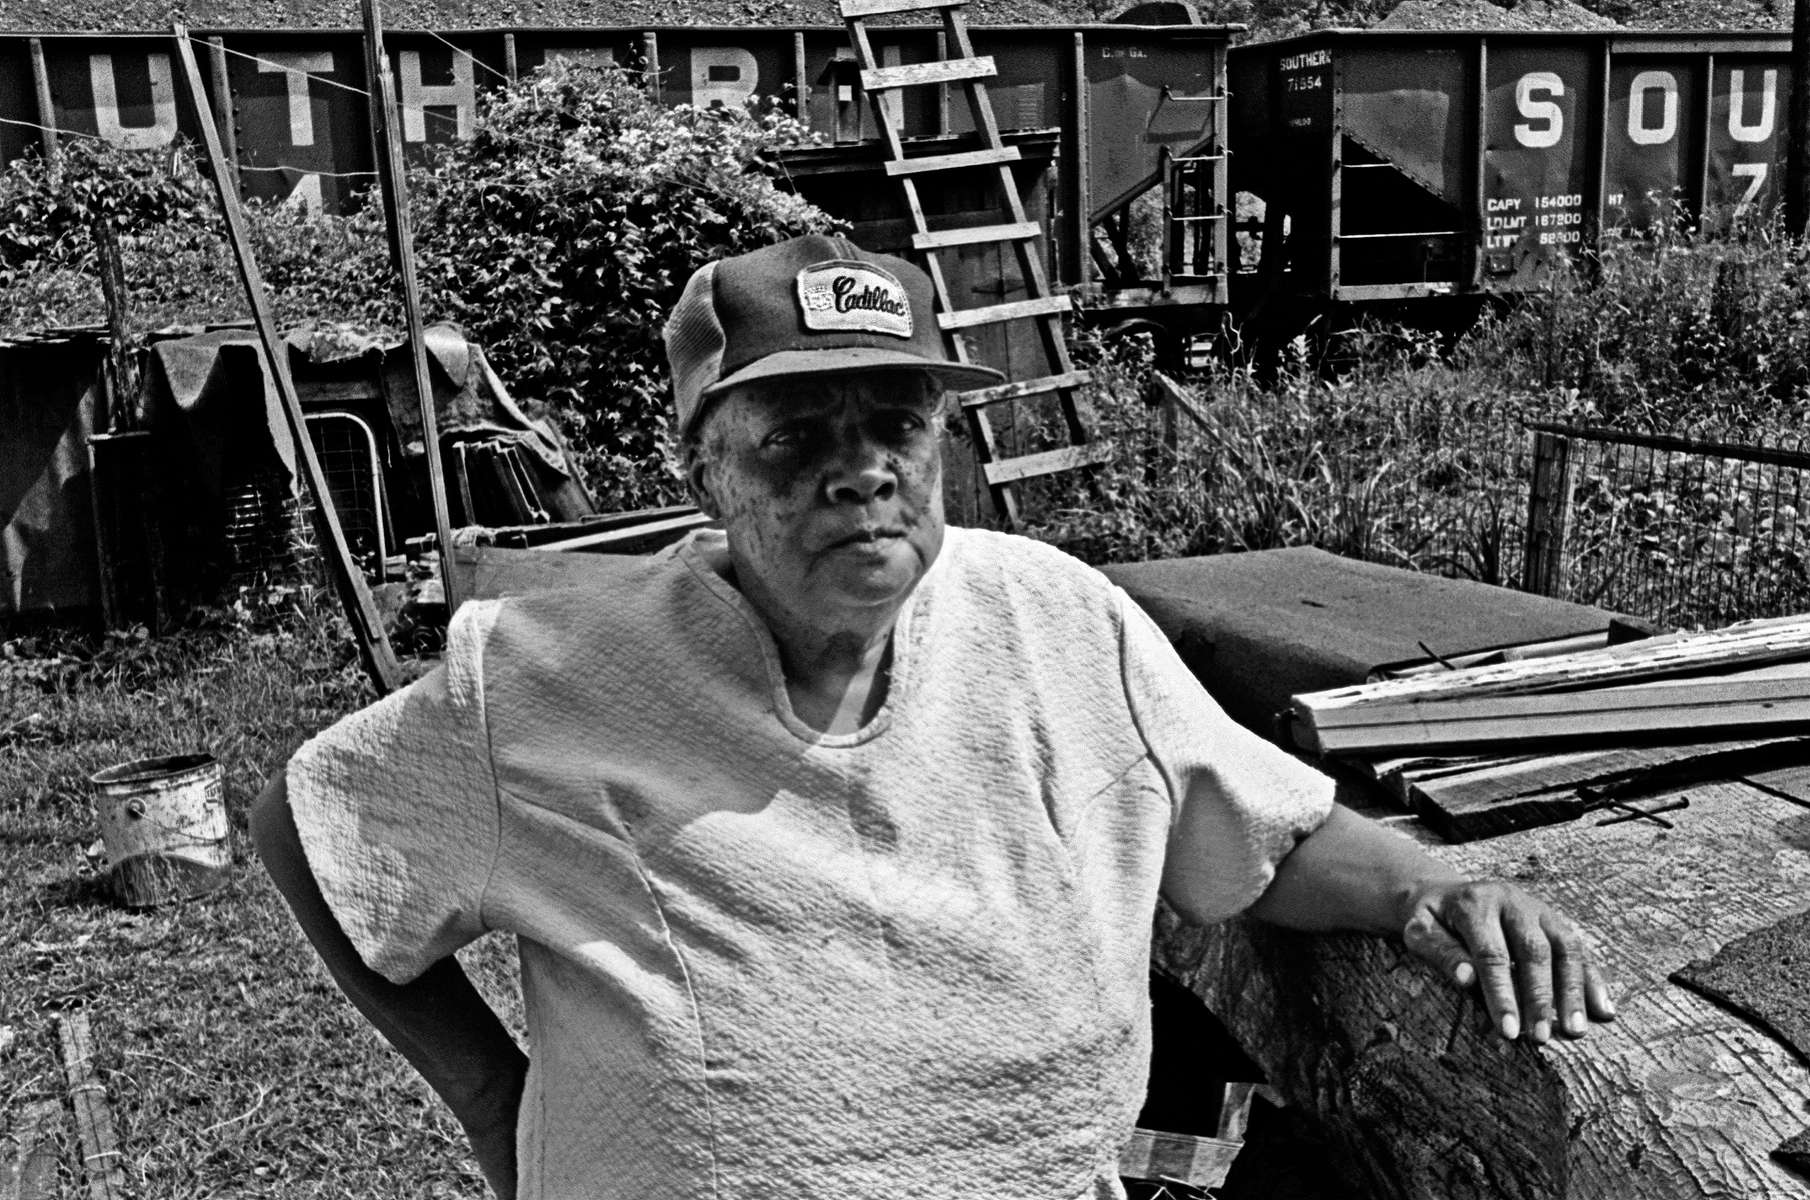 Woman with a Cadillac hat stands in her backyard, with a freight train parked on tracks behind. She lived in an all-Black hollow in the back hills of West Virginia. She posed willingly for me, but after few minutes her husband called her back into the house. She quickly told me, {quote}You'd better get moving. My husband says he's getting his gun right now.{quote} People don't are kindly to strangers, and no stranger had any reason to visit this small, isolated settlement. Jon Chase photo 